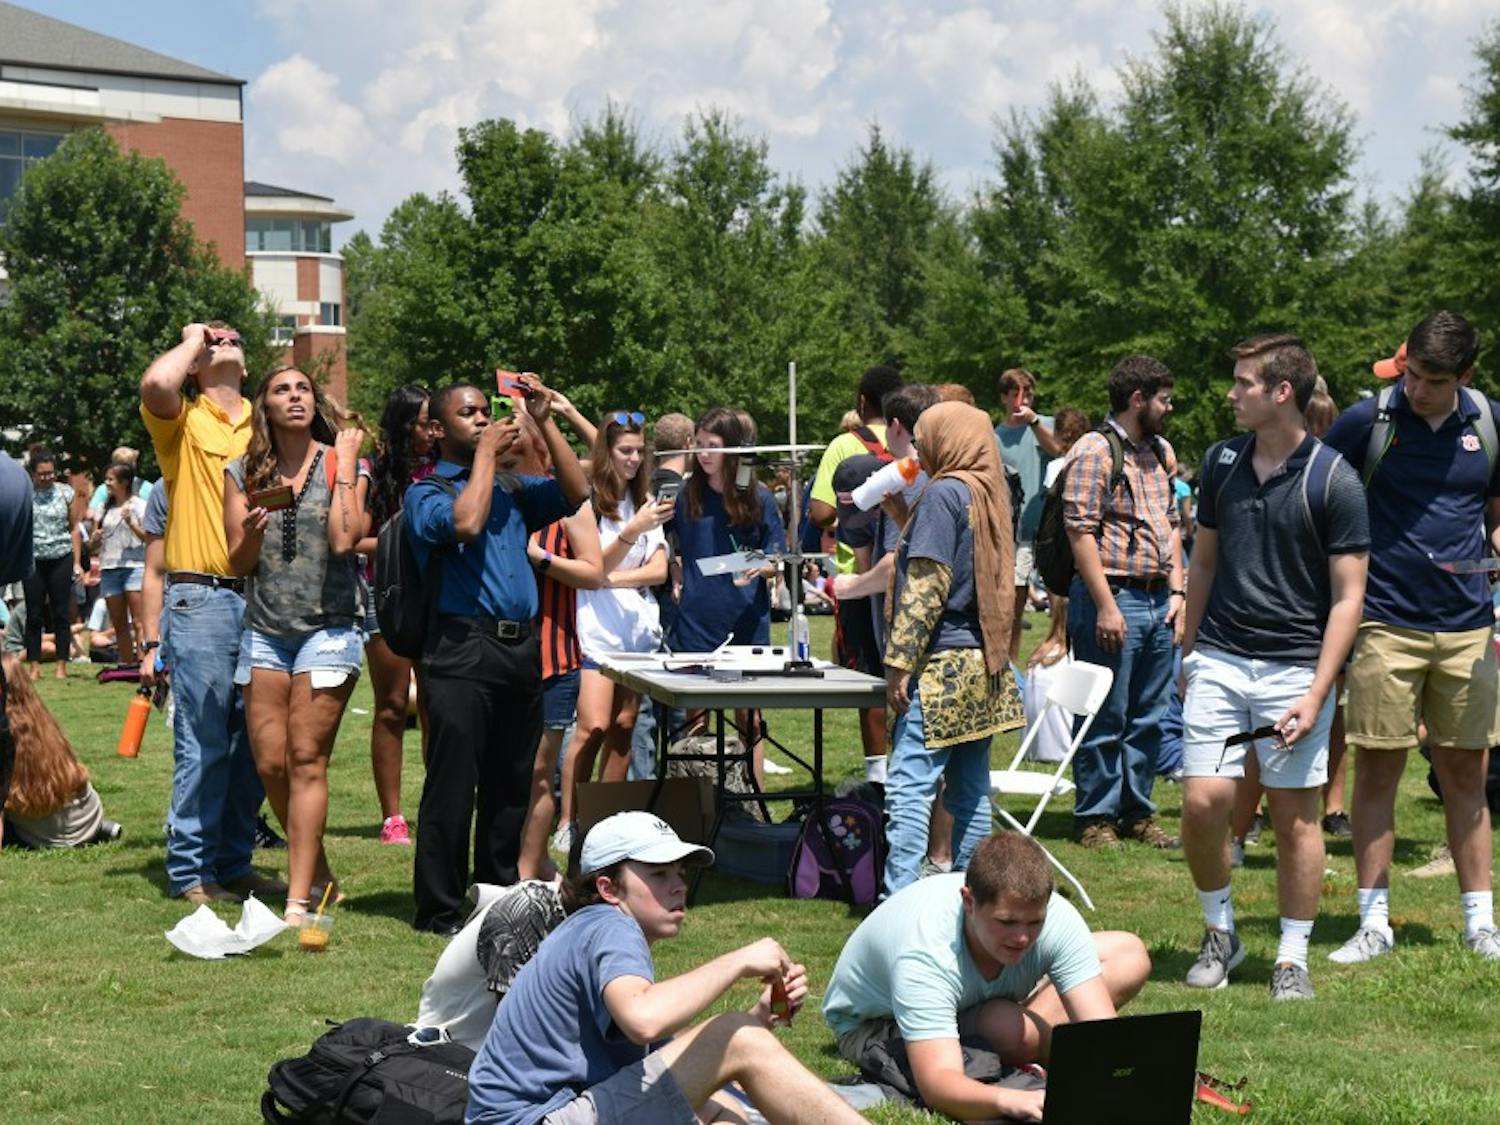 Students gathered on the green space to look to the sky.